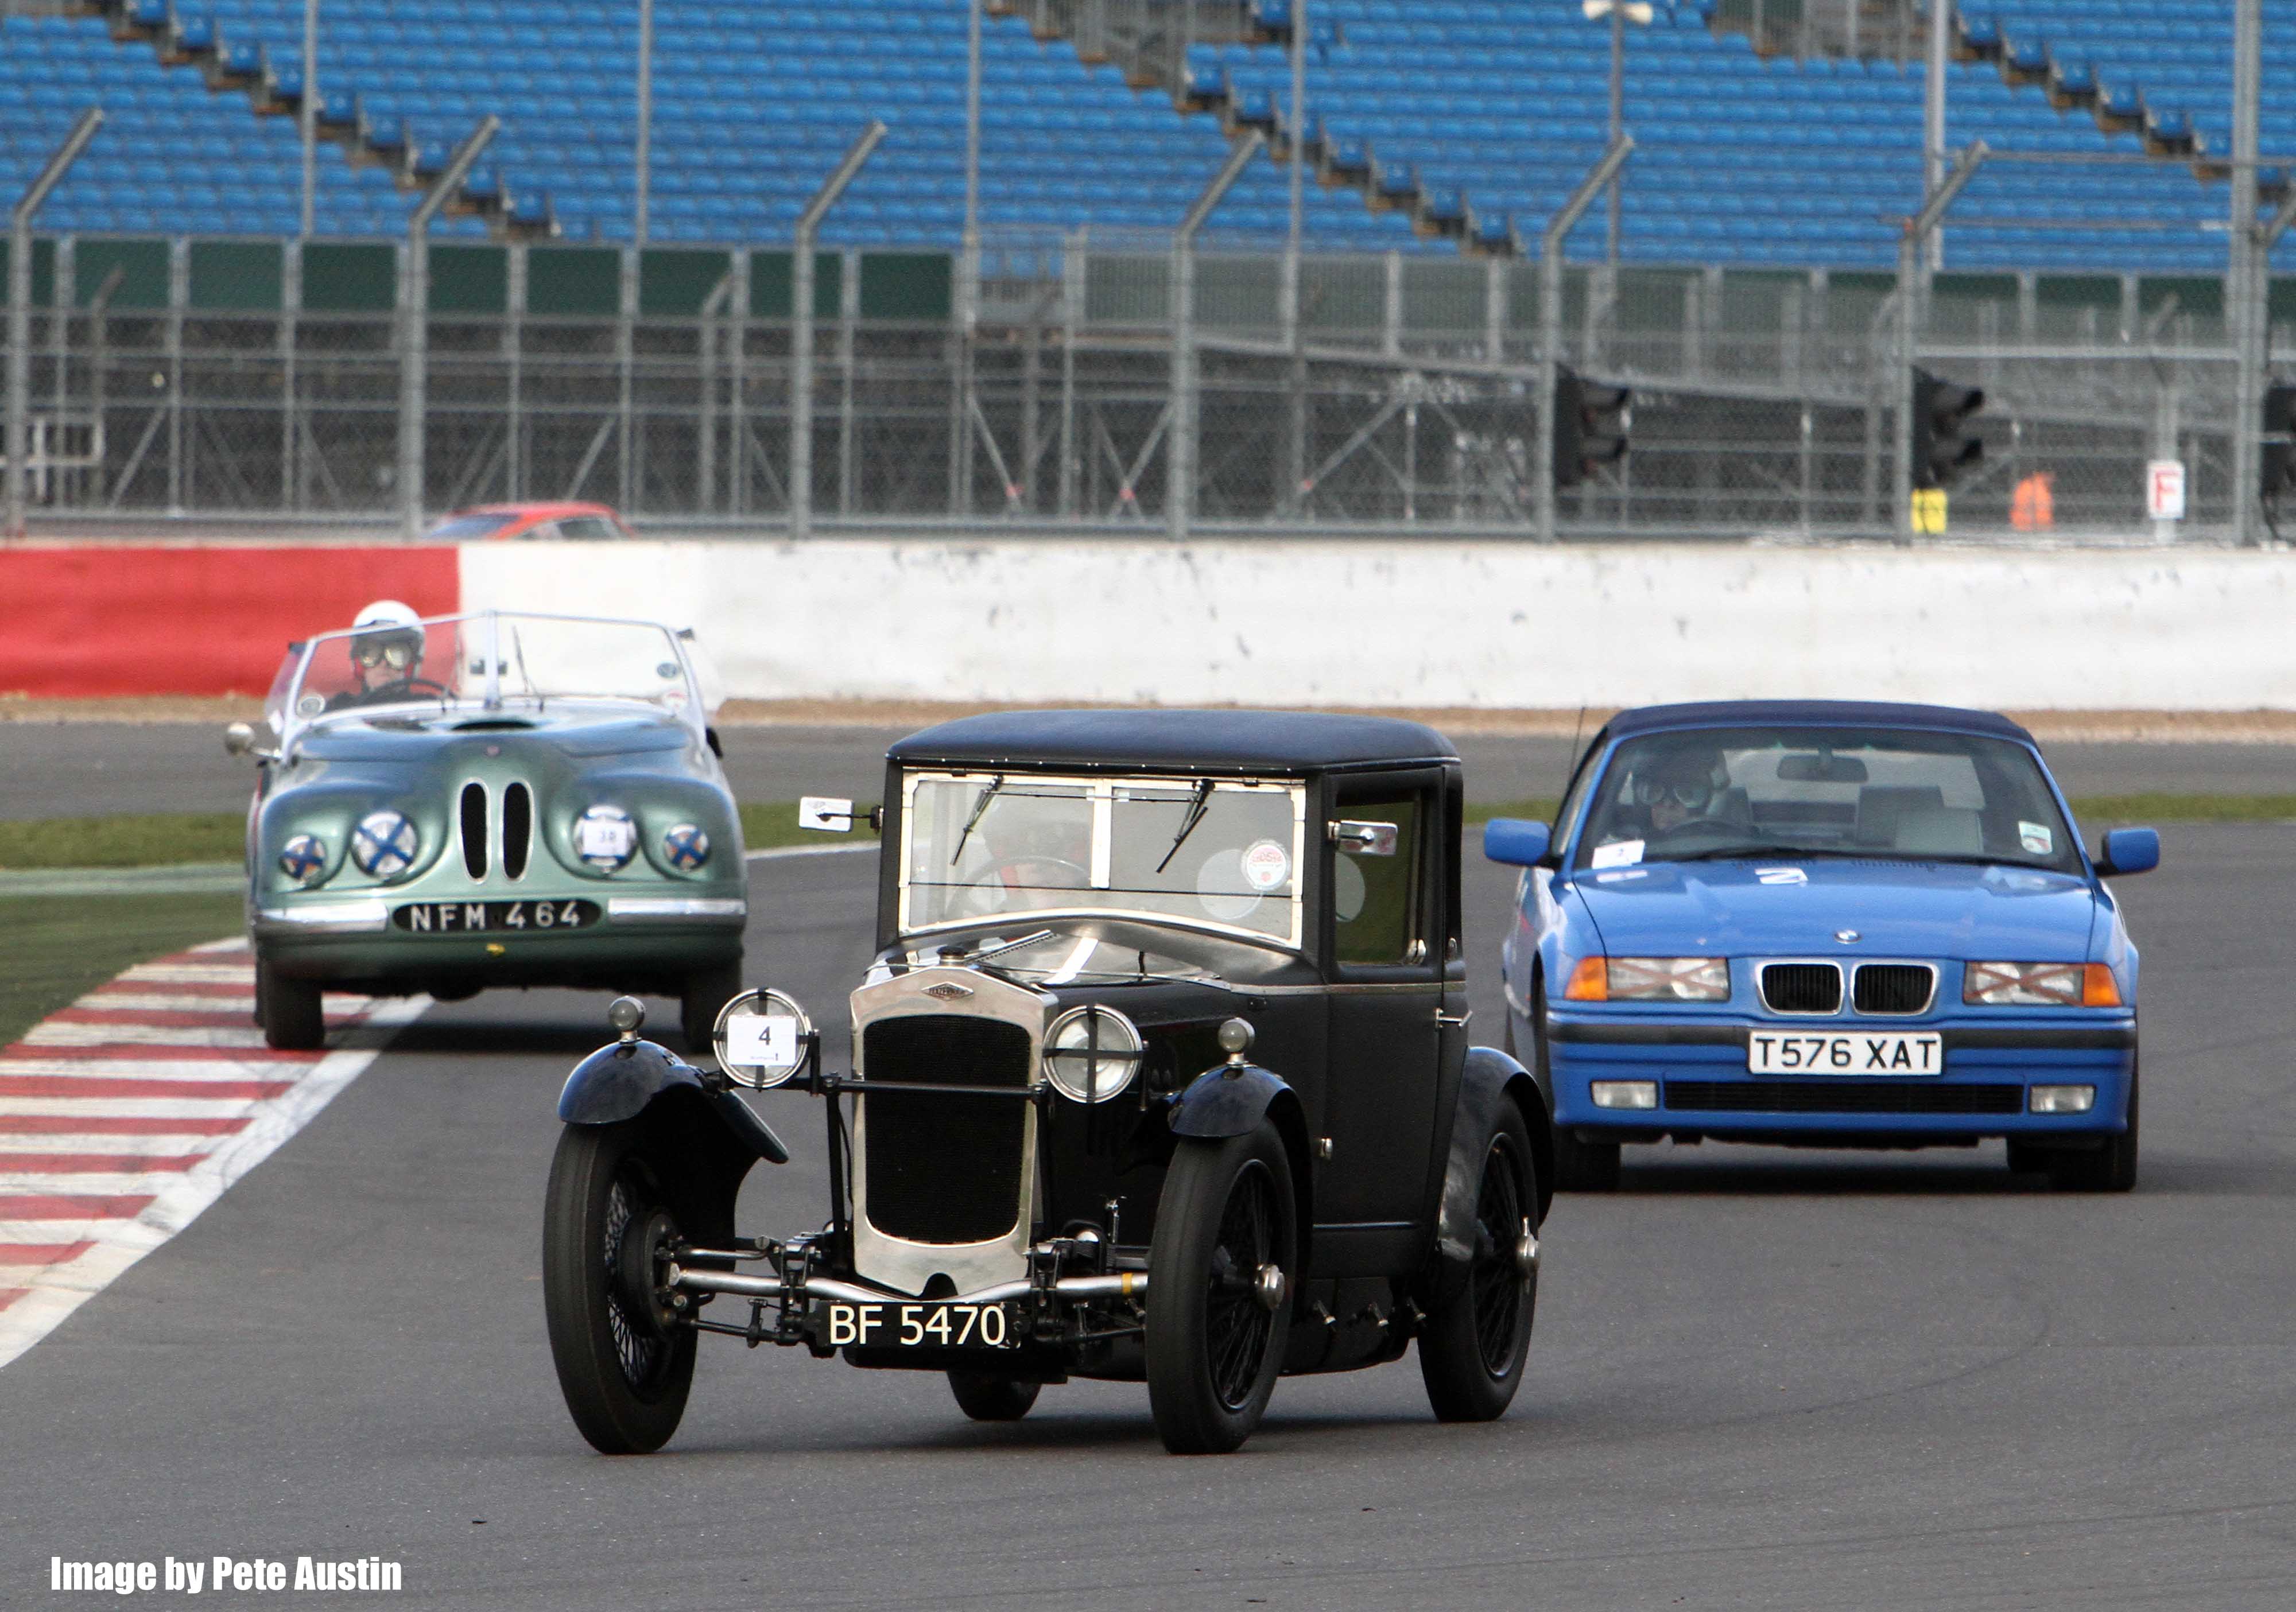 VSCC Pomeroy Trophy 2015 – the legend continues this weekend at Silverstone cover